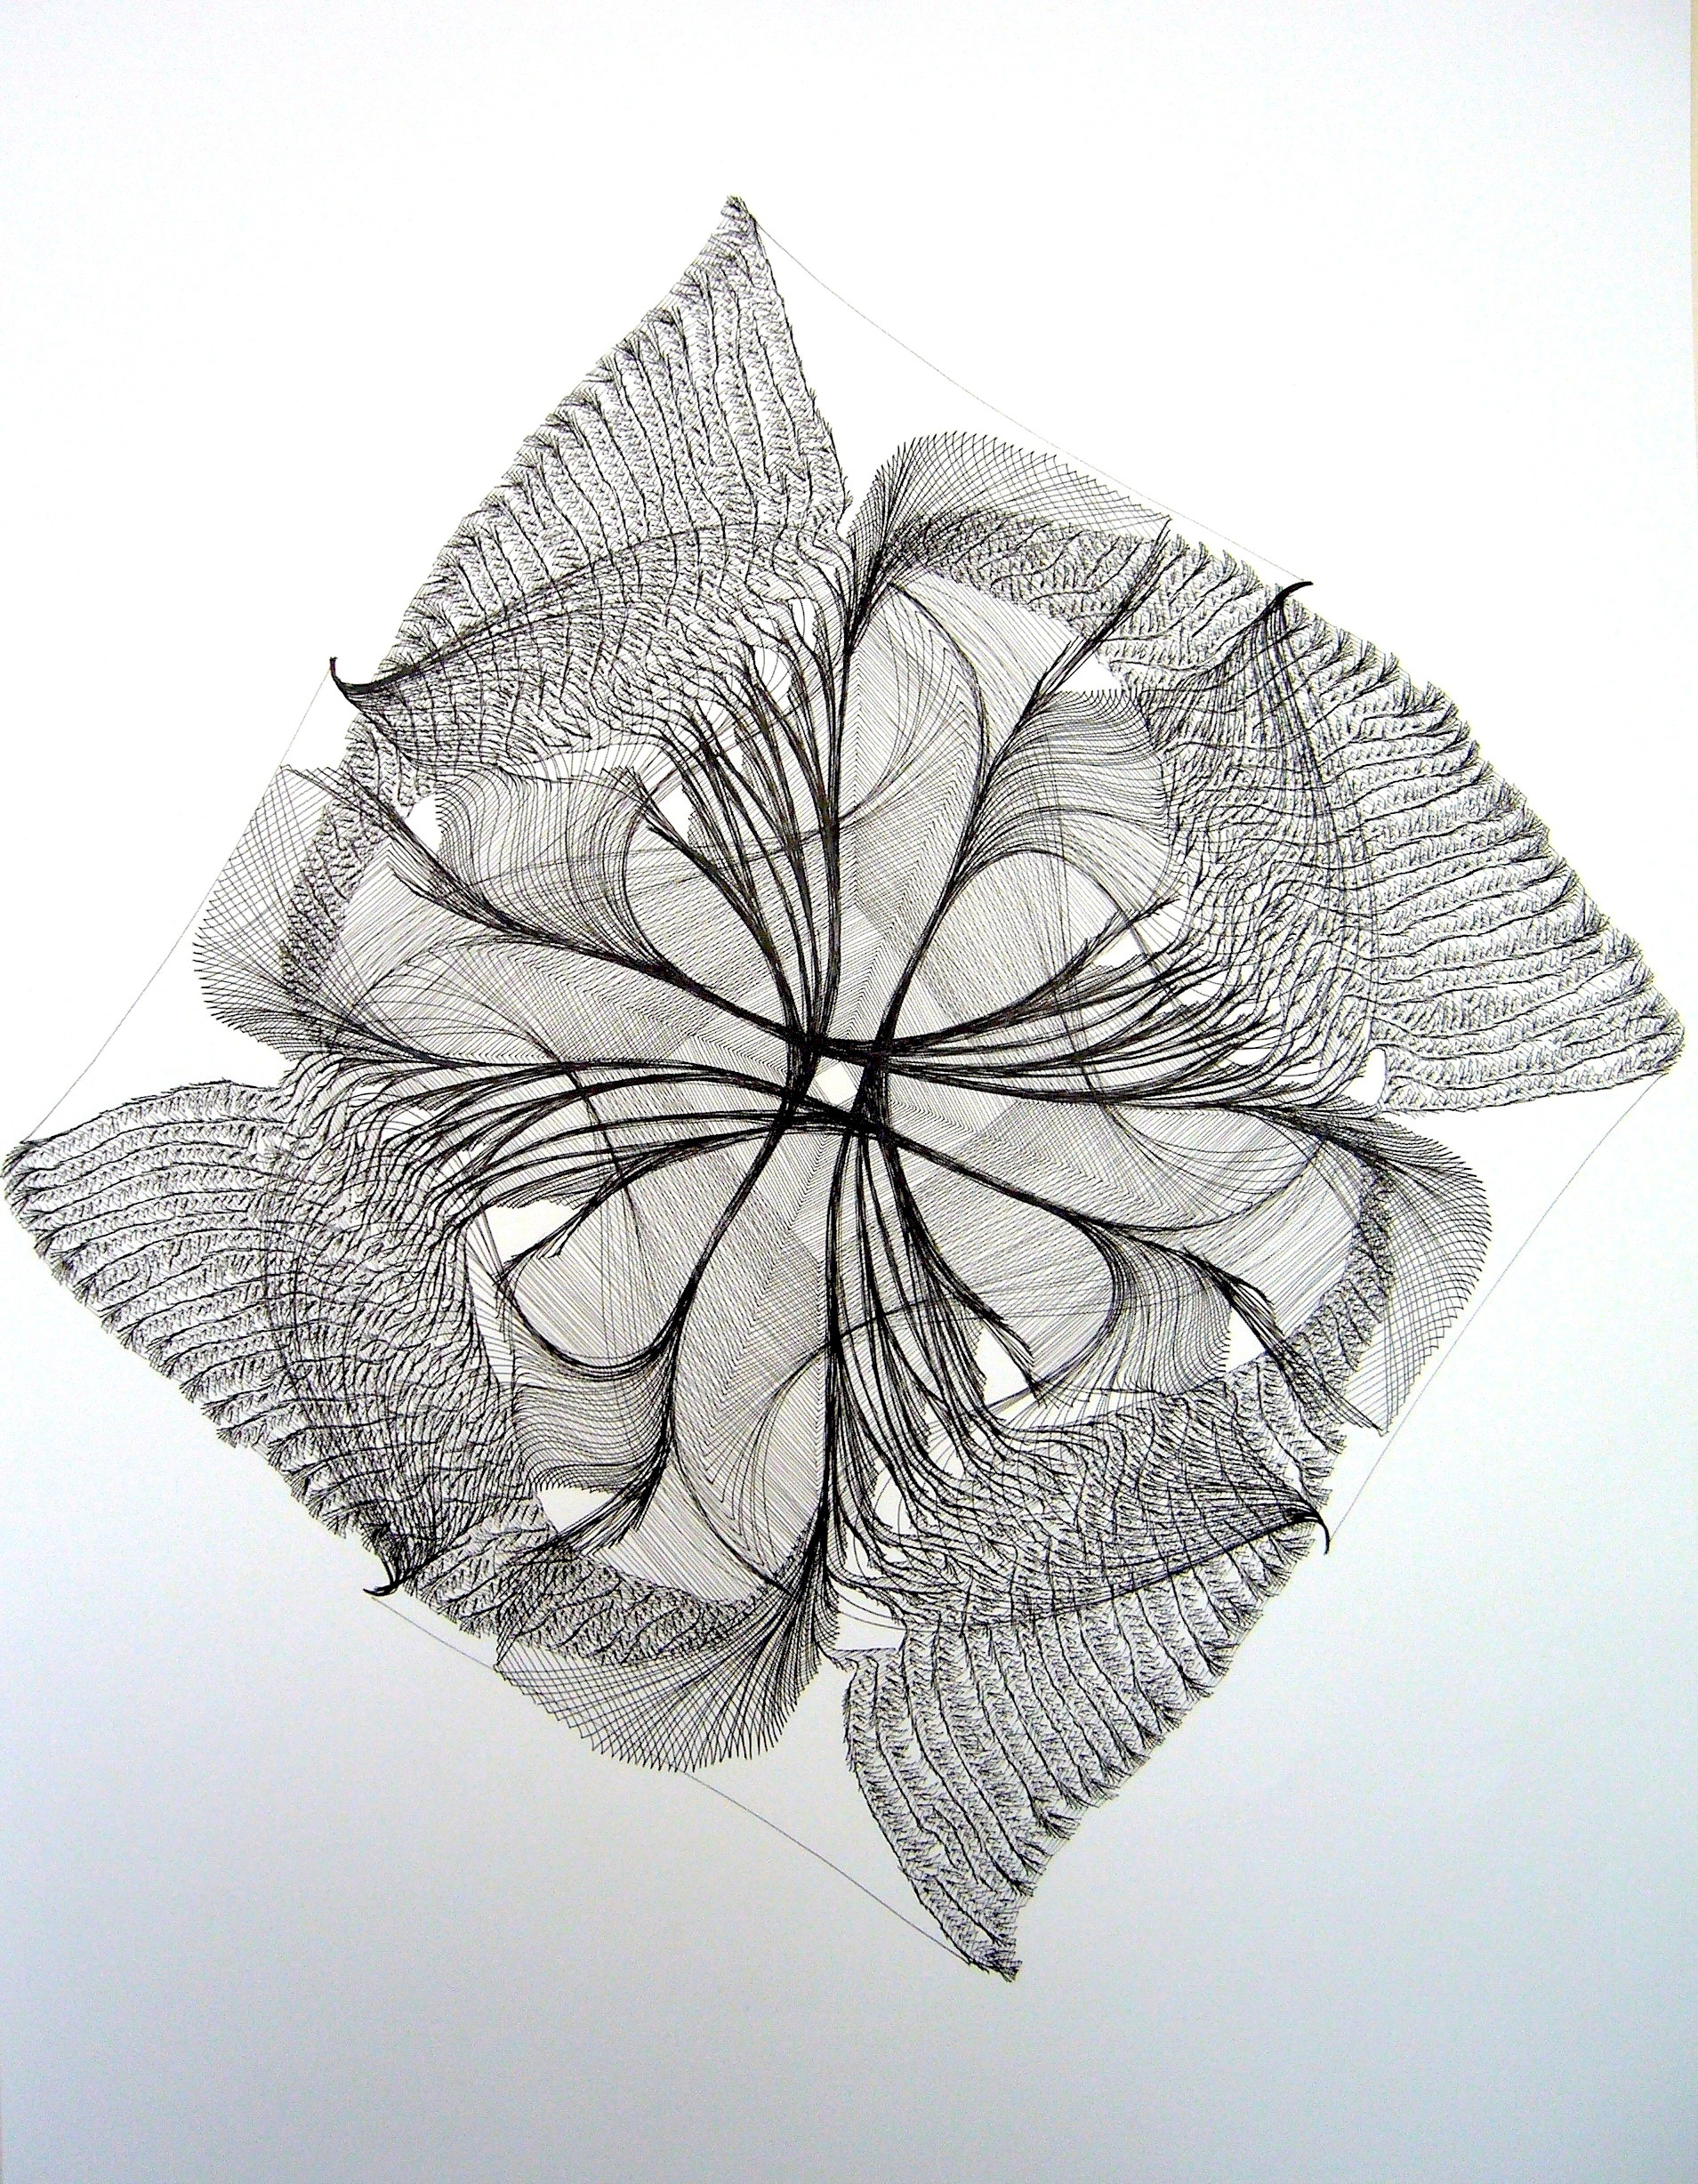 Cheryl Malone, drawings, ink on paper